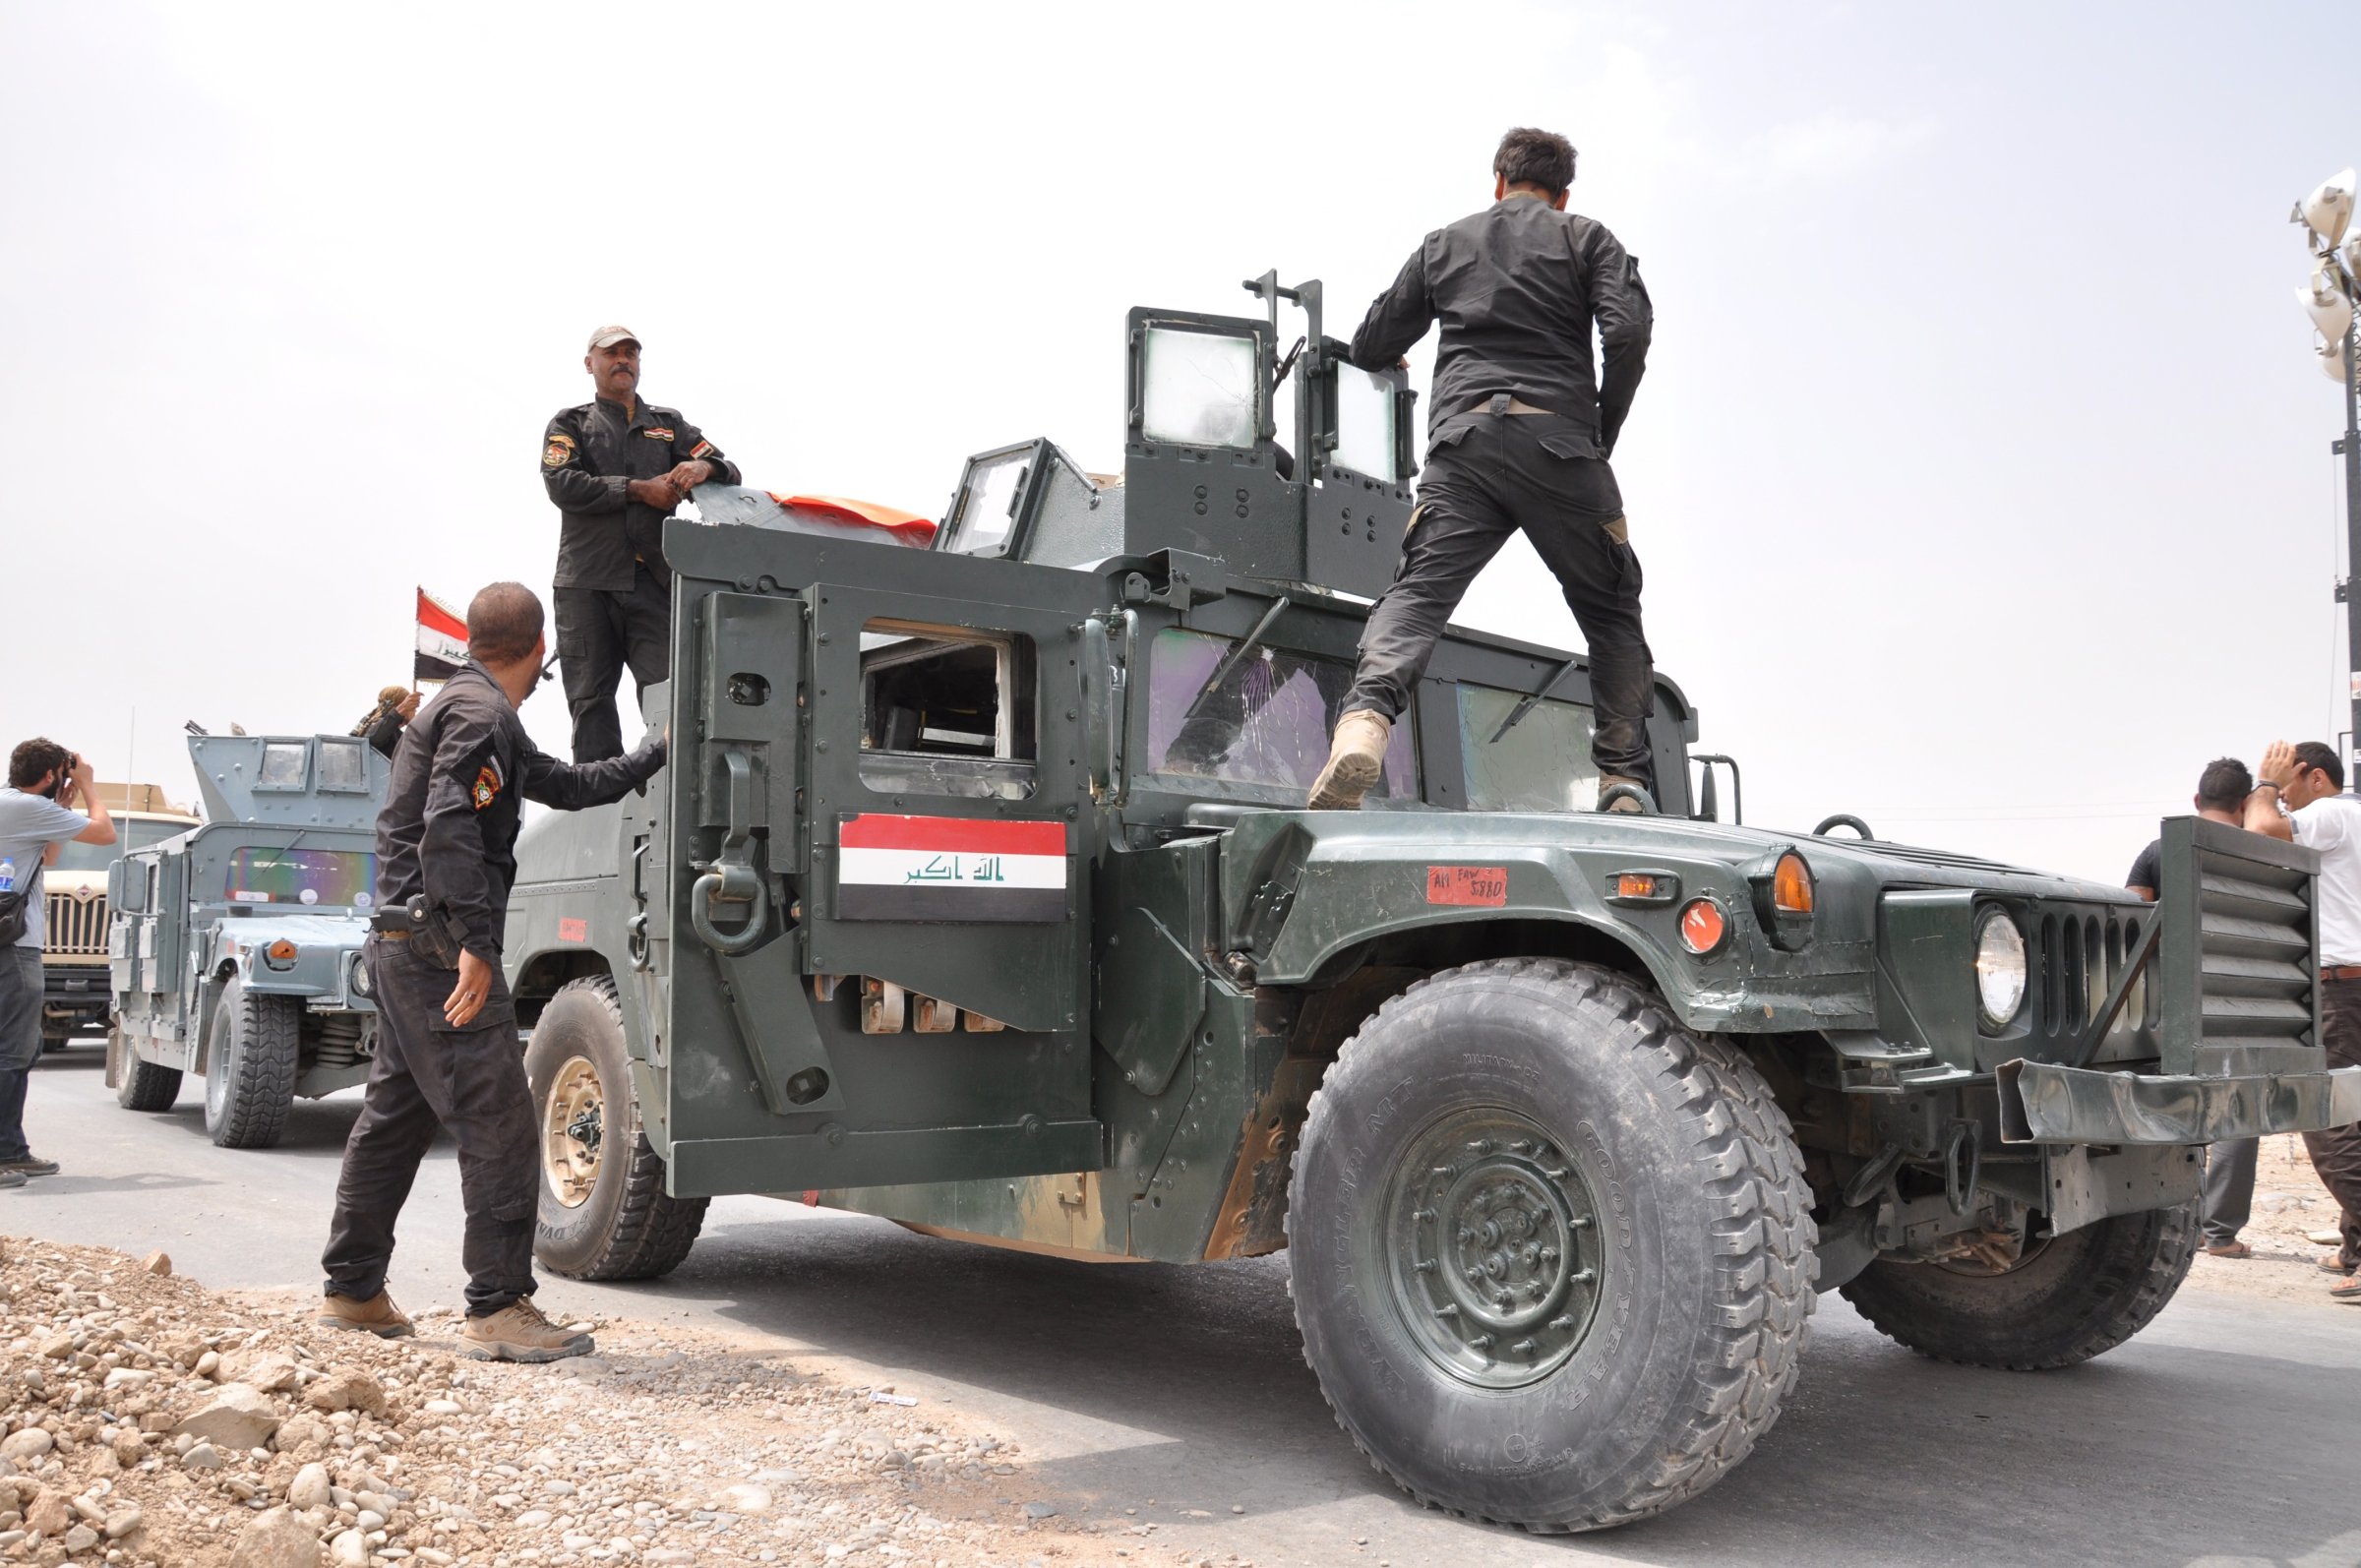 IS-led militants driven from Mosul Dam